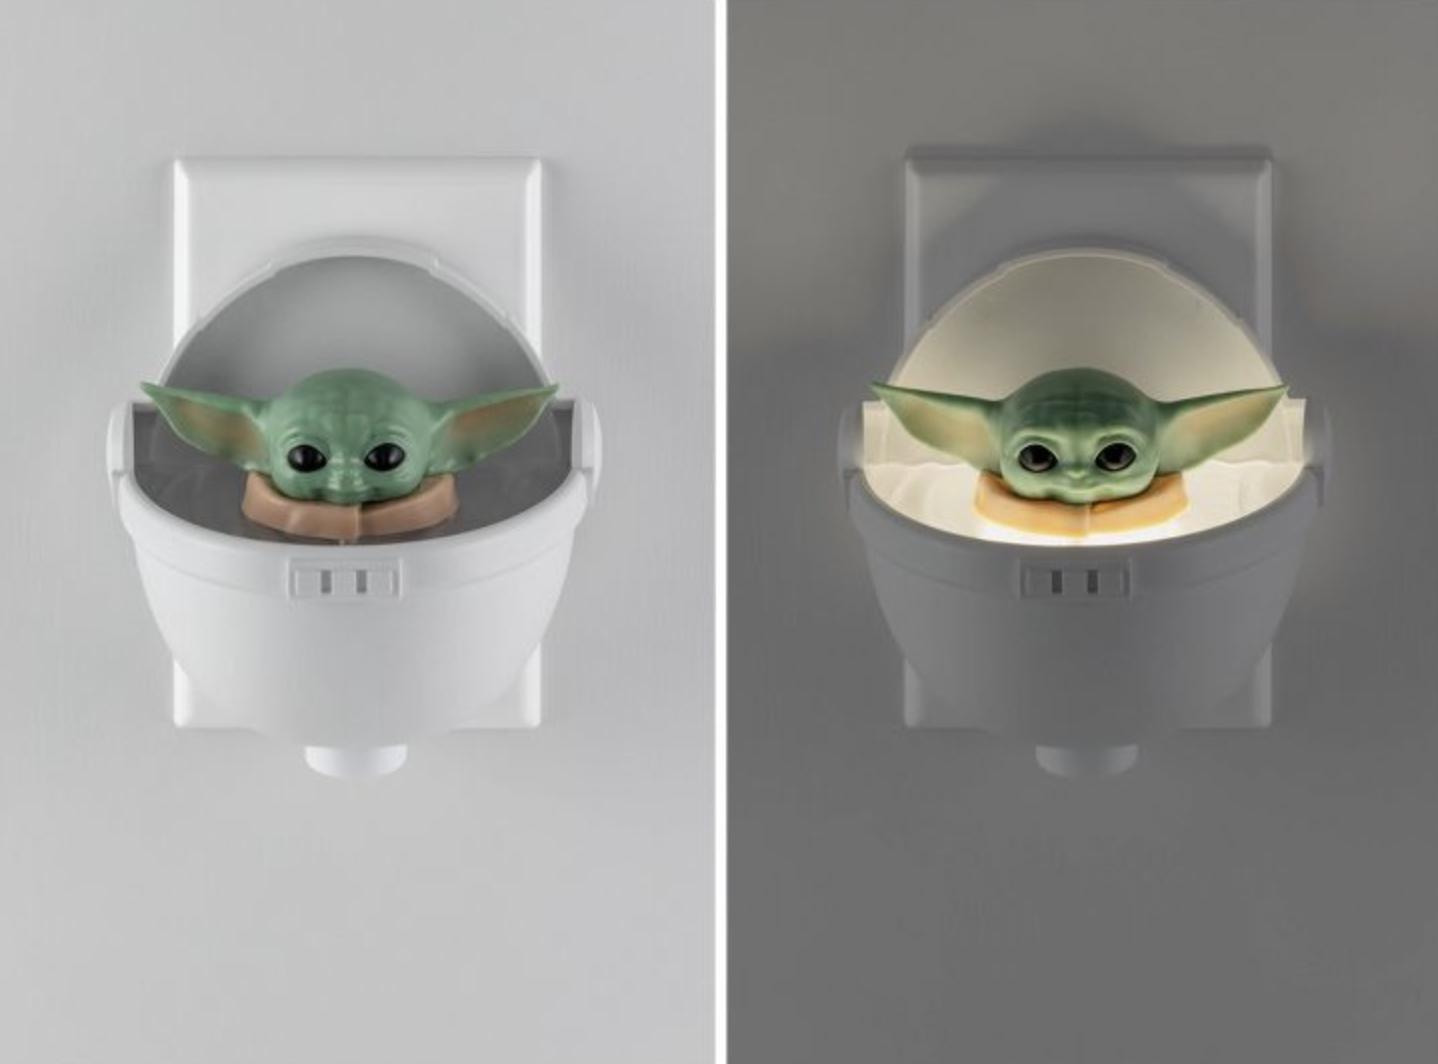 A Baby Yoda night-light with glow for nighttime use